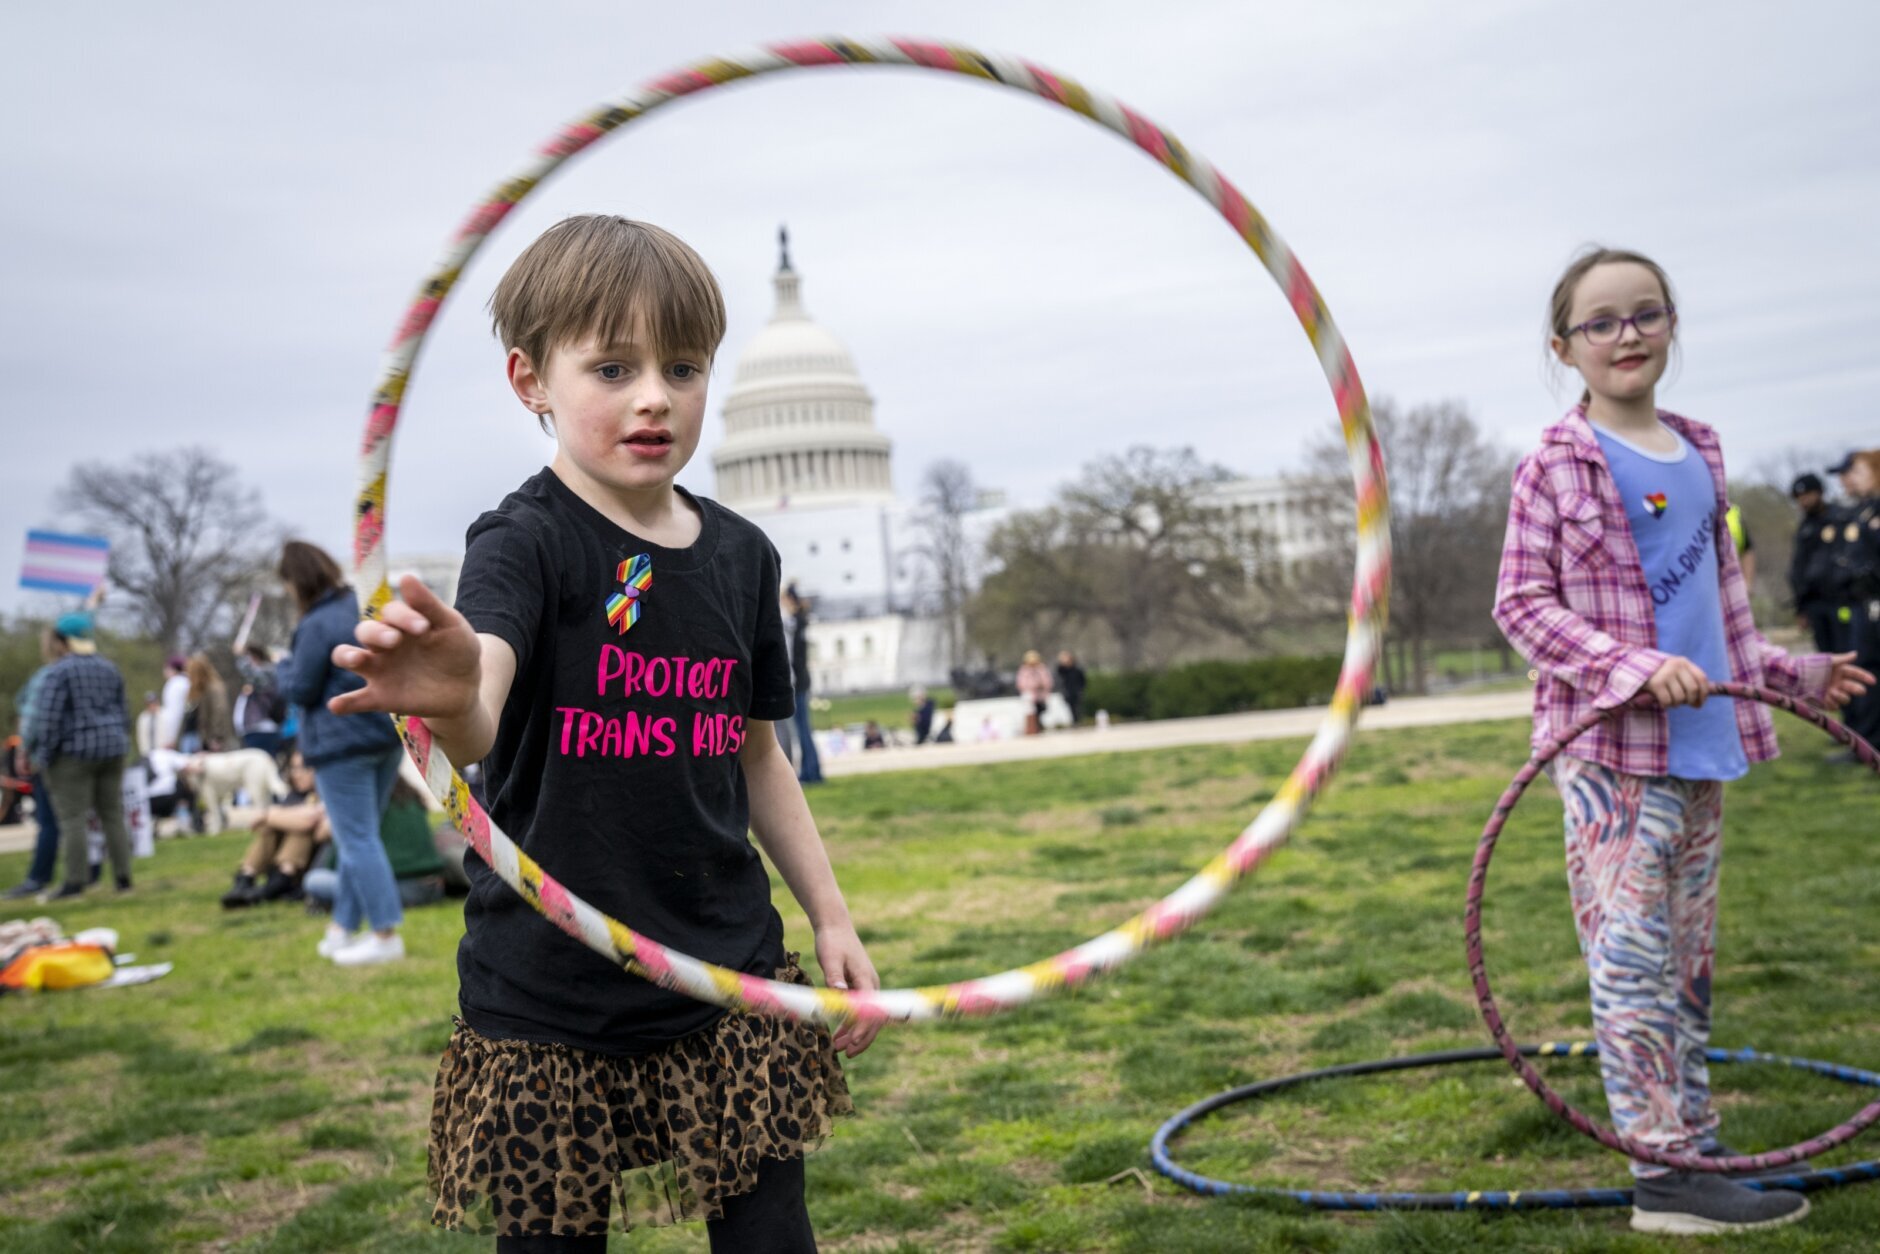 REP Game of the Month: Hula Hoop Tag